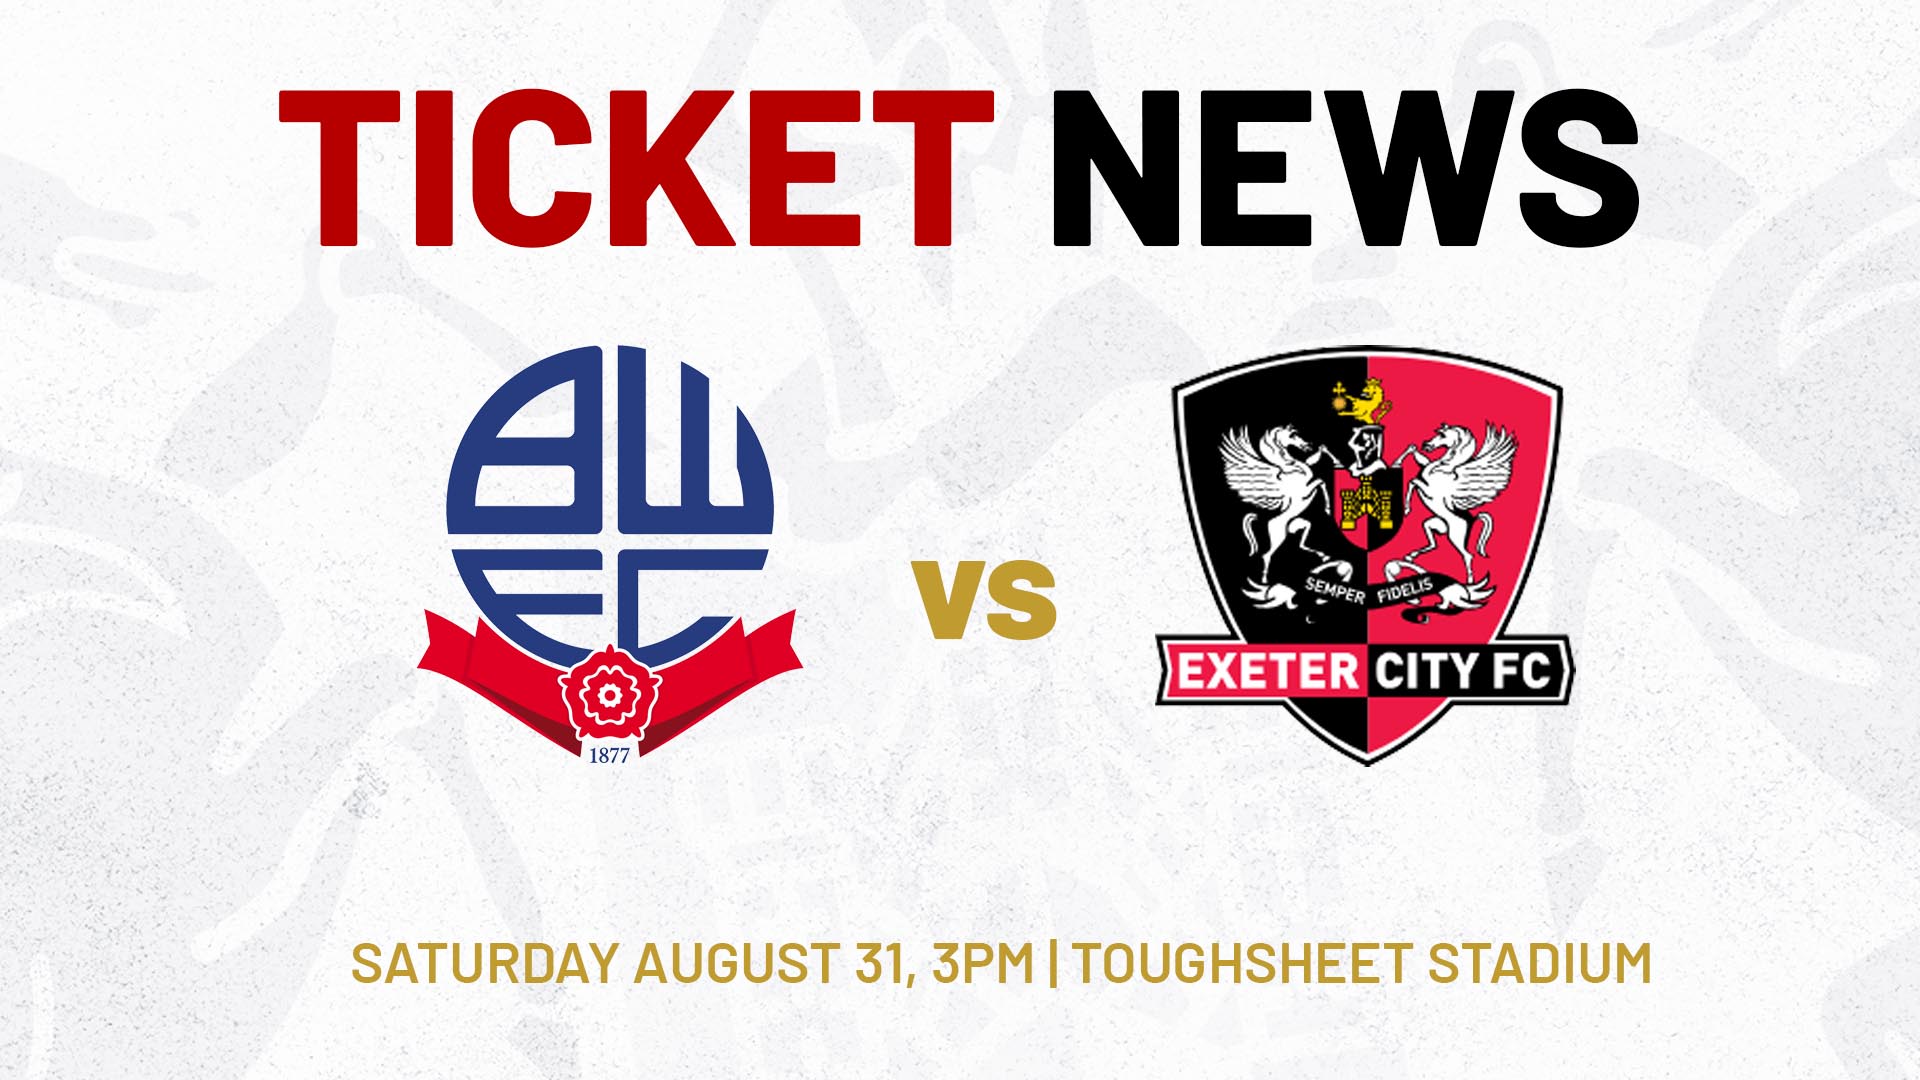 Ticket news for Bolton Wanderers